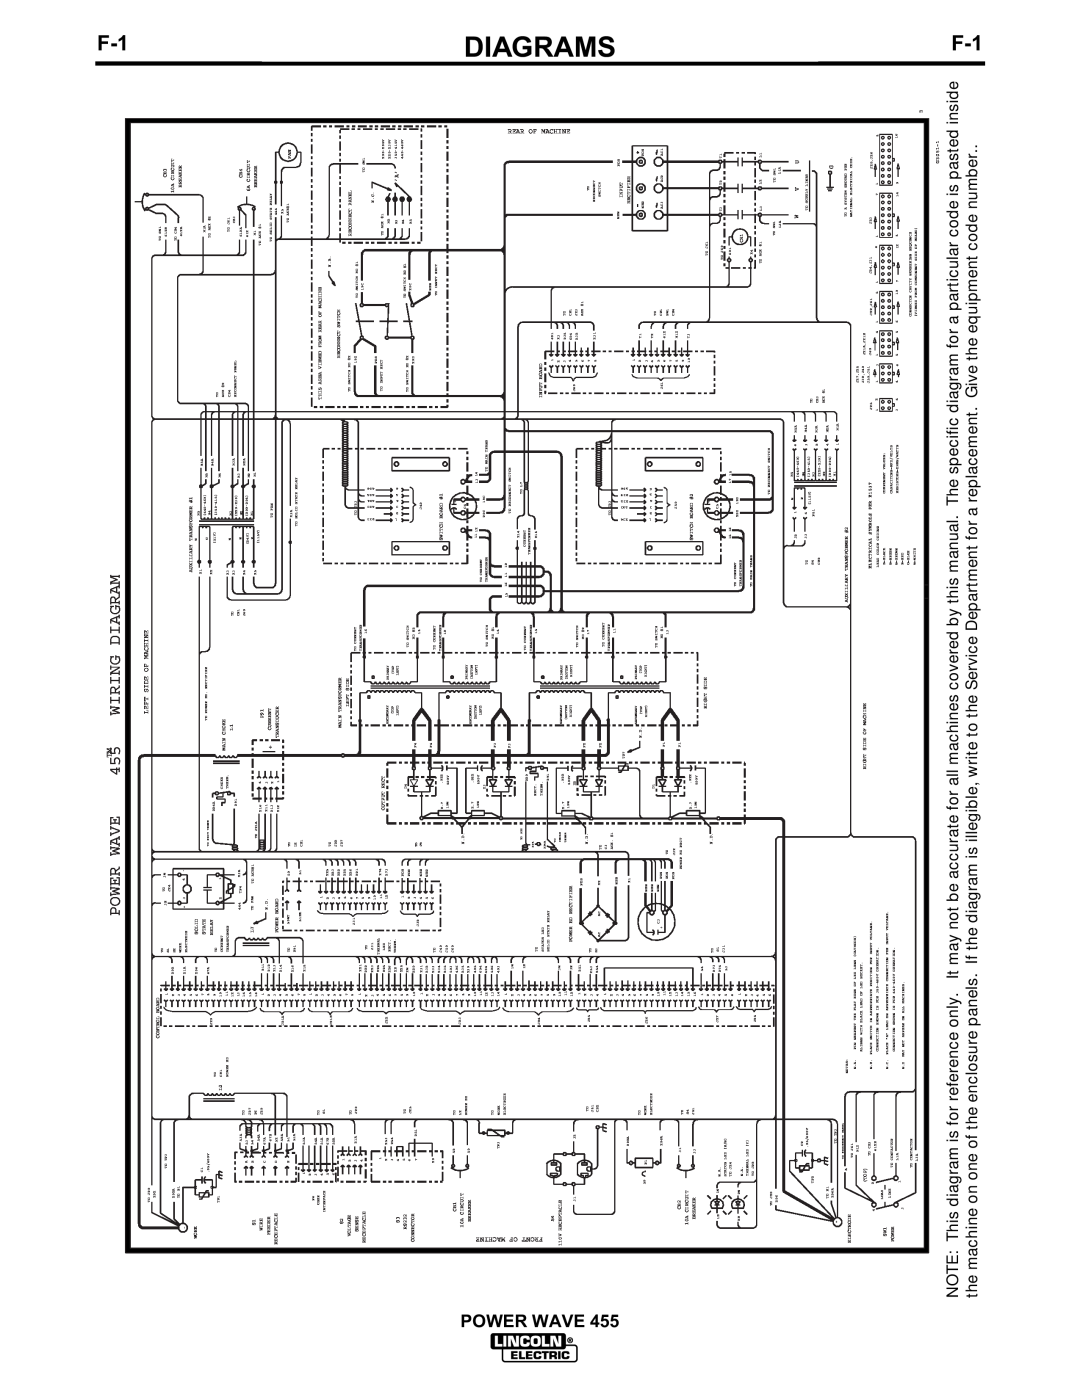 Lincoln Electric IM583-A manual Power Wave, Wiring Diagram 